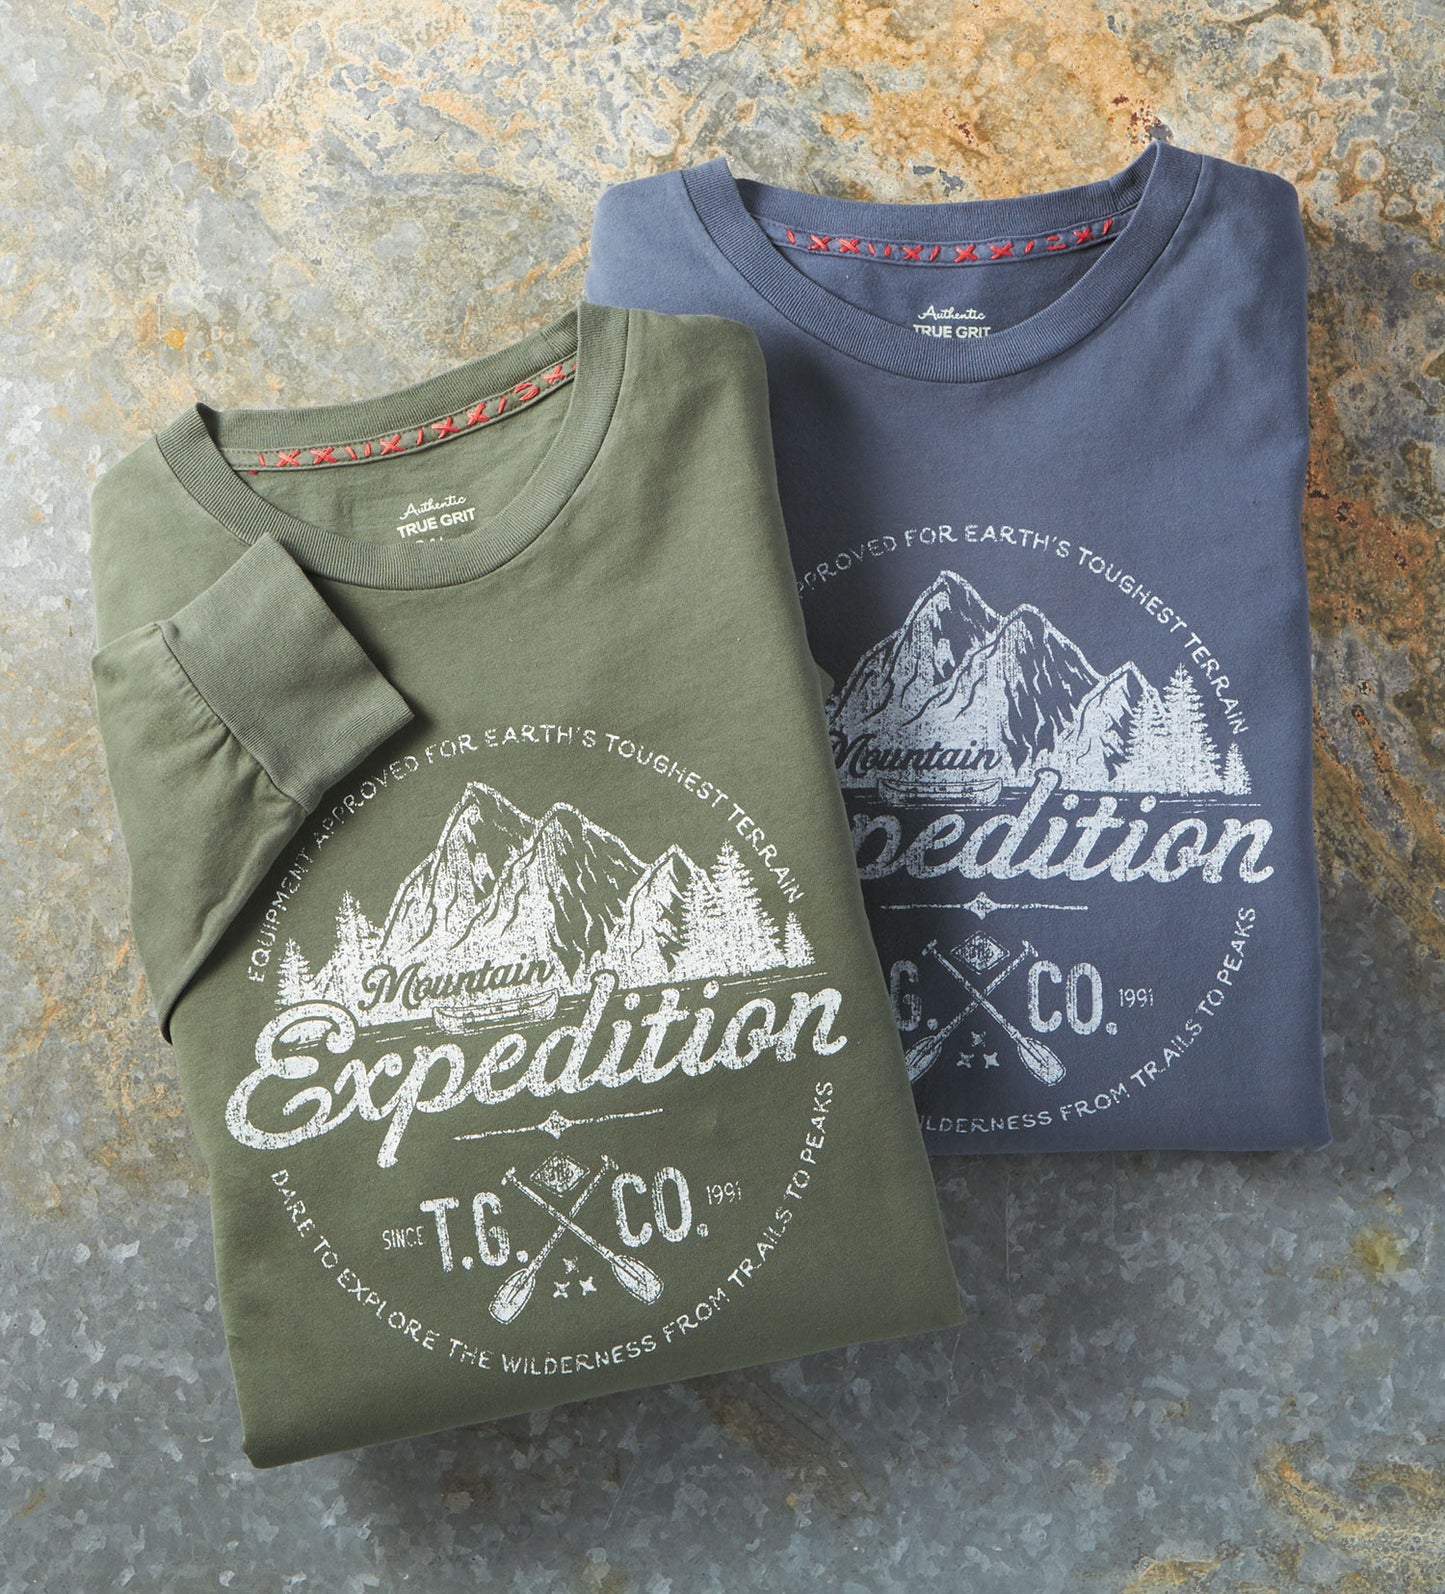 True Grit Expedition Tee